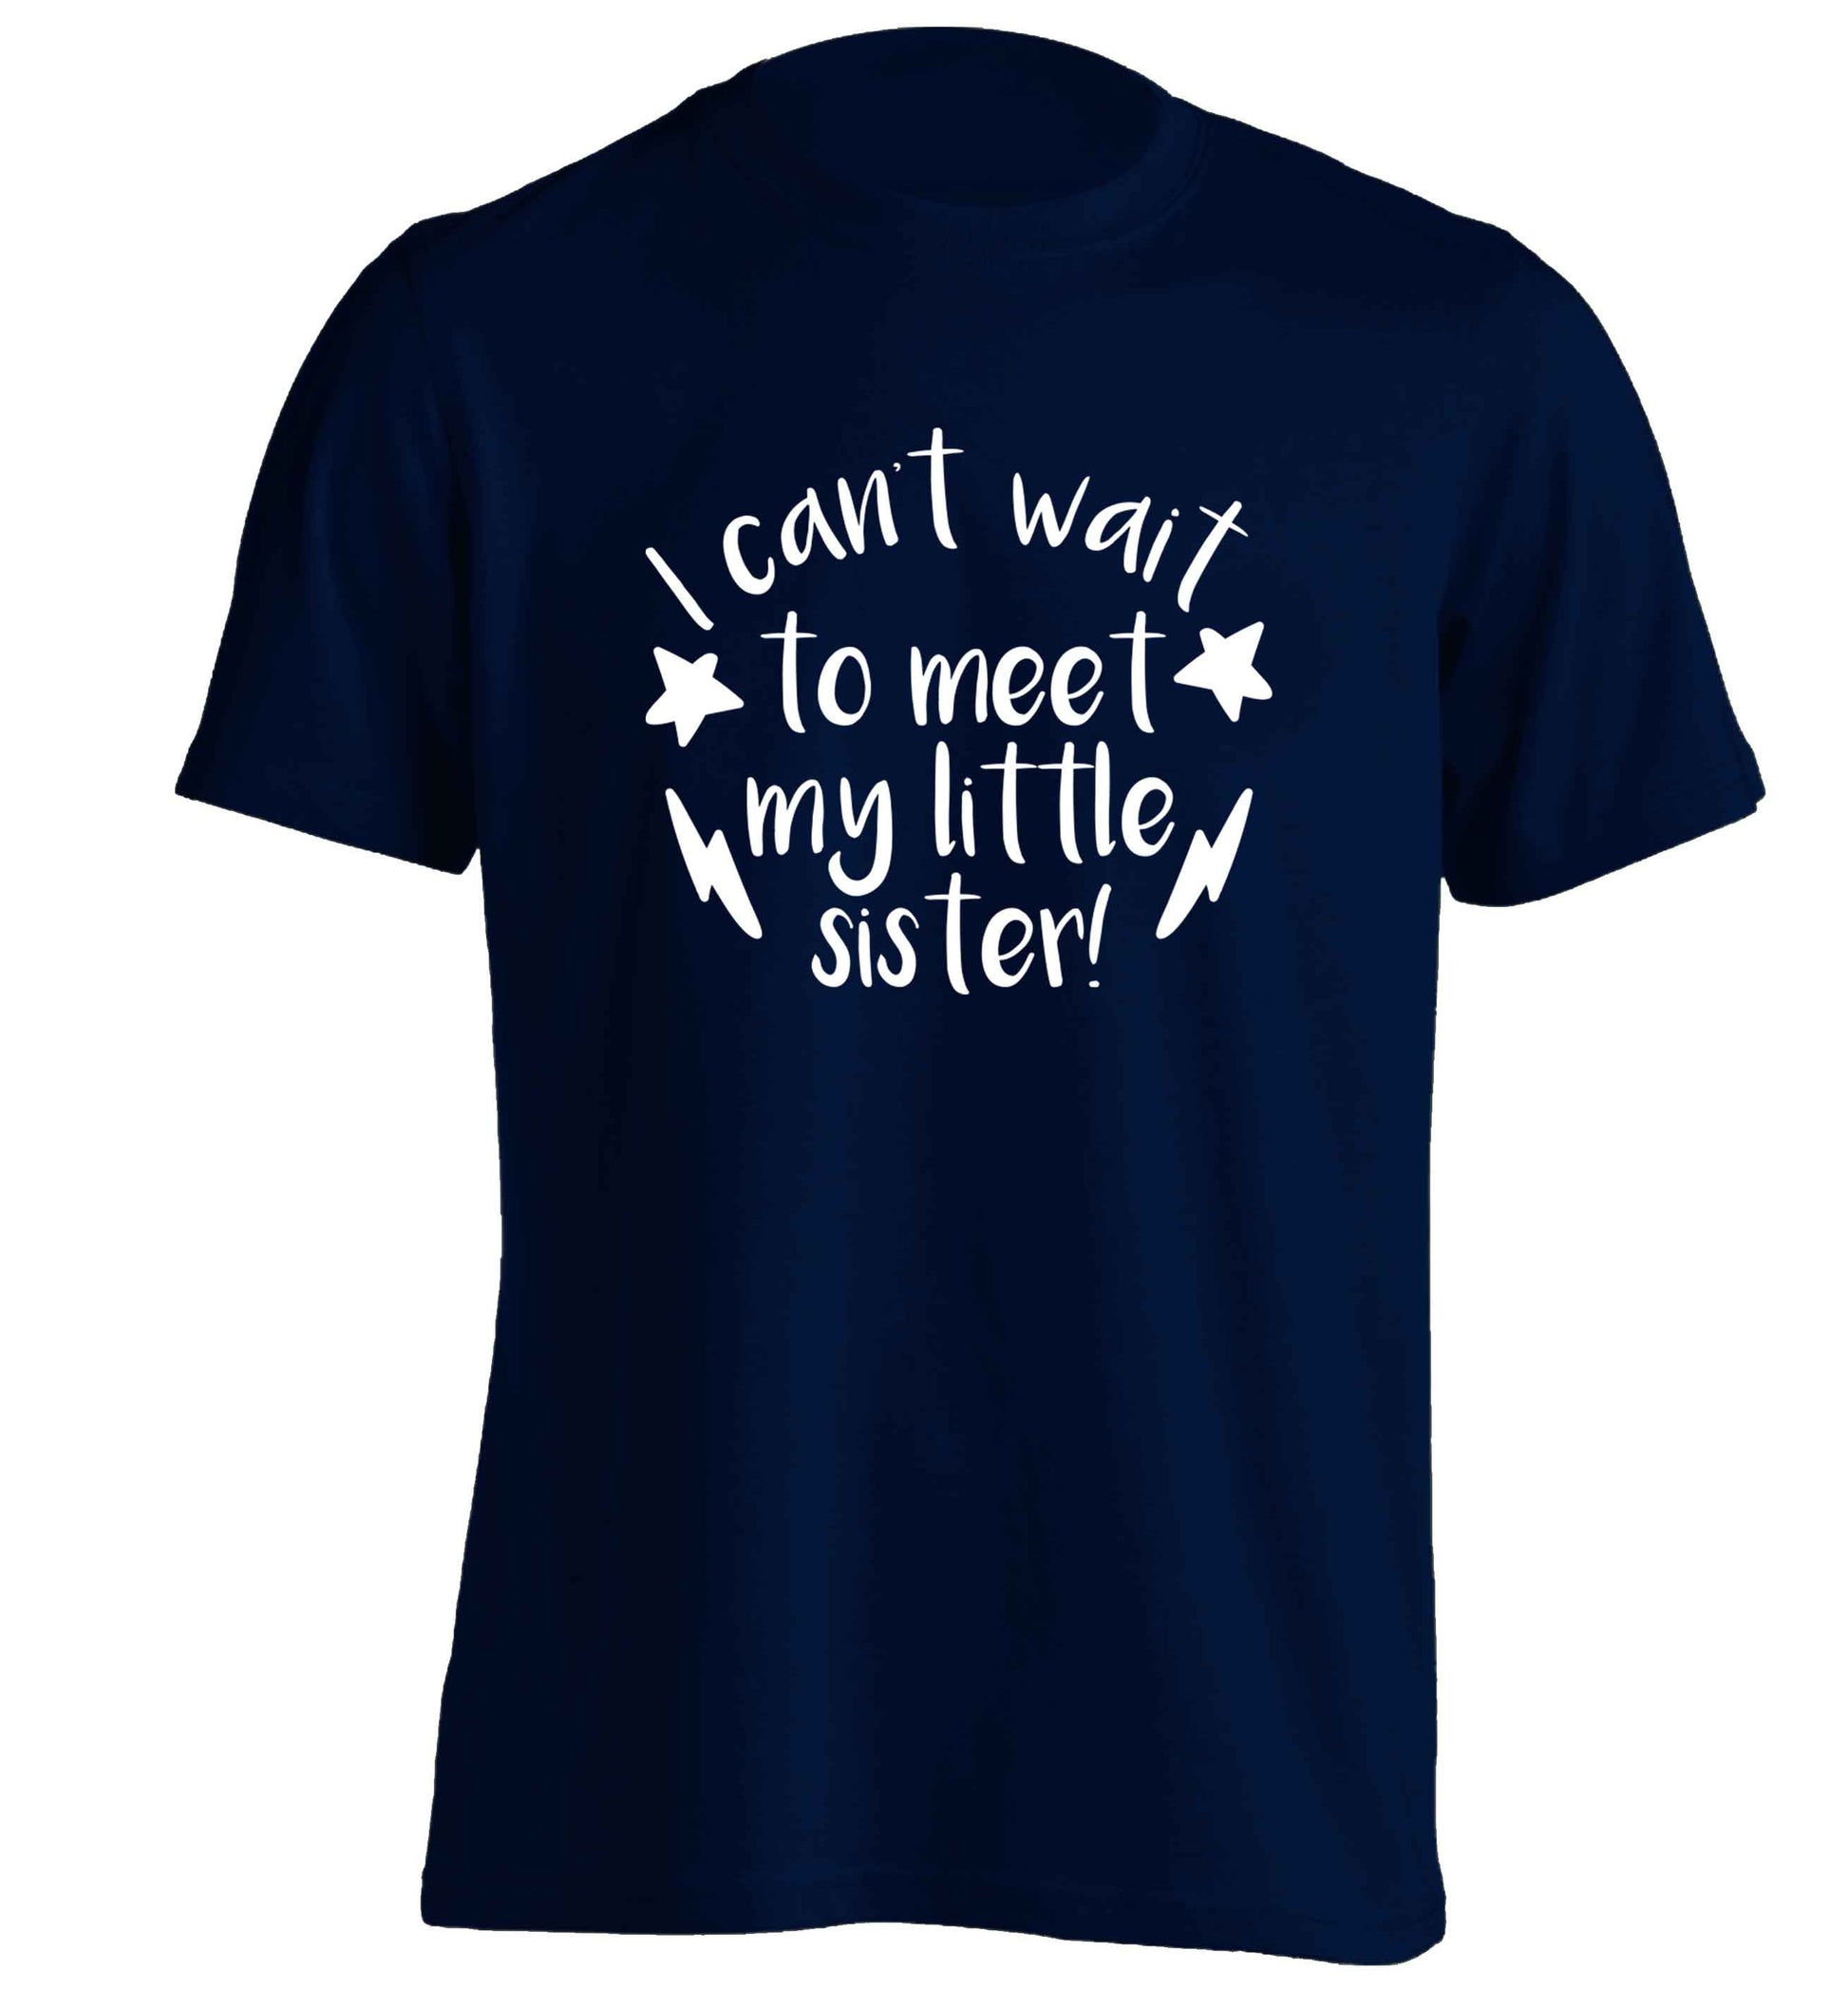 Something special growing inside it's my little sister I can't wait to say hi! adults unisex navy Tshirt 2XL